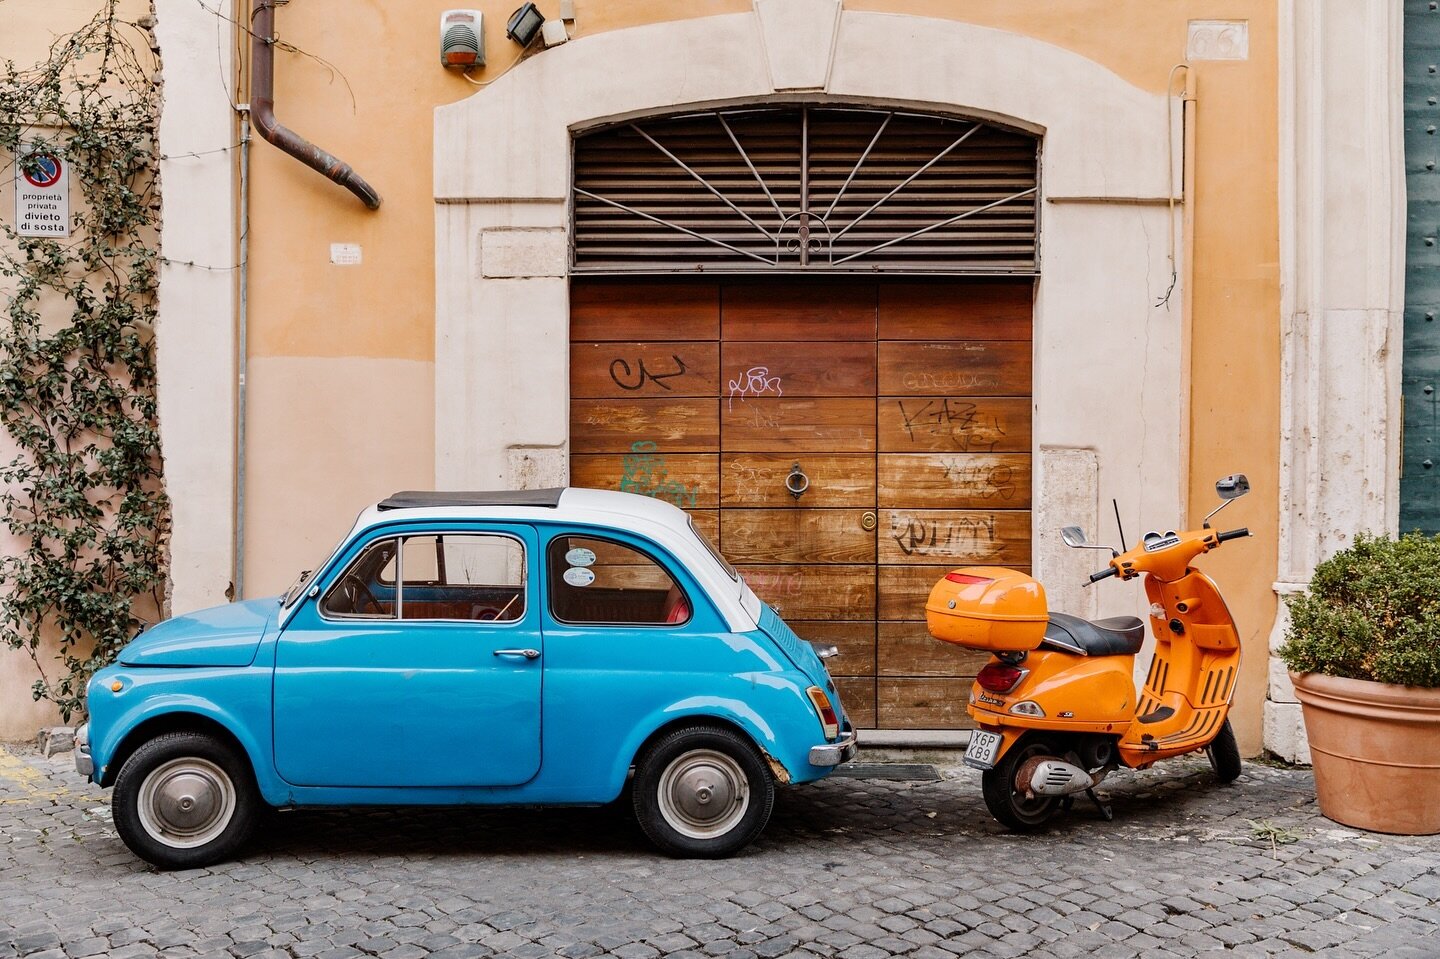 I always come back to this shot from a trip through Rome. The real grunge scenery and pop of two vehicles my American sensibility found quaint. Just charming.